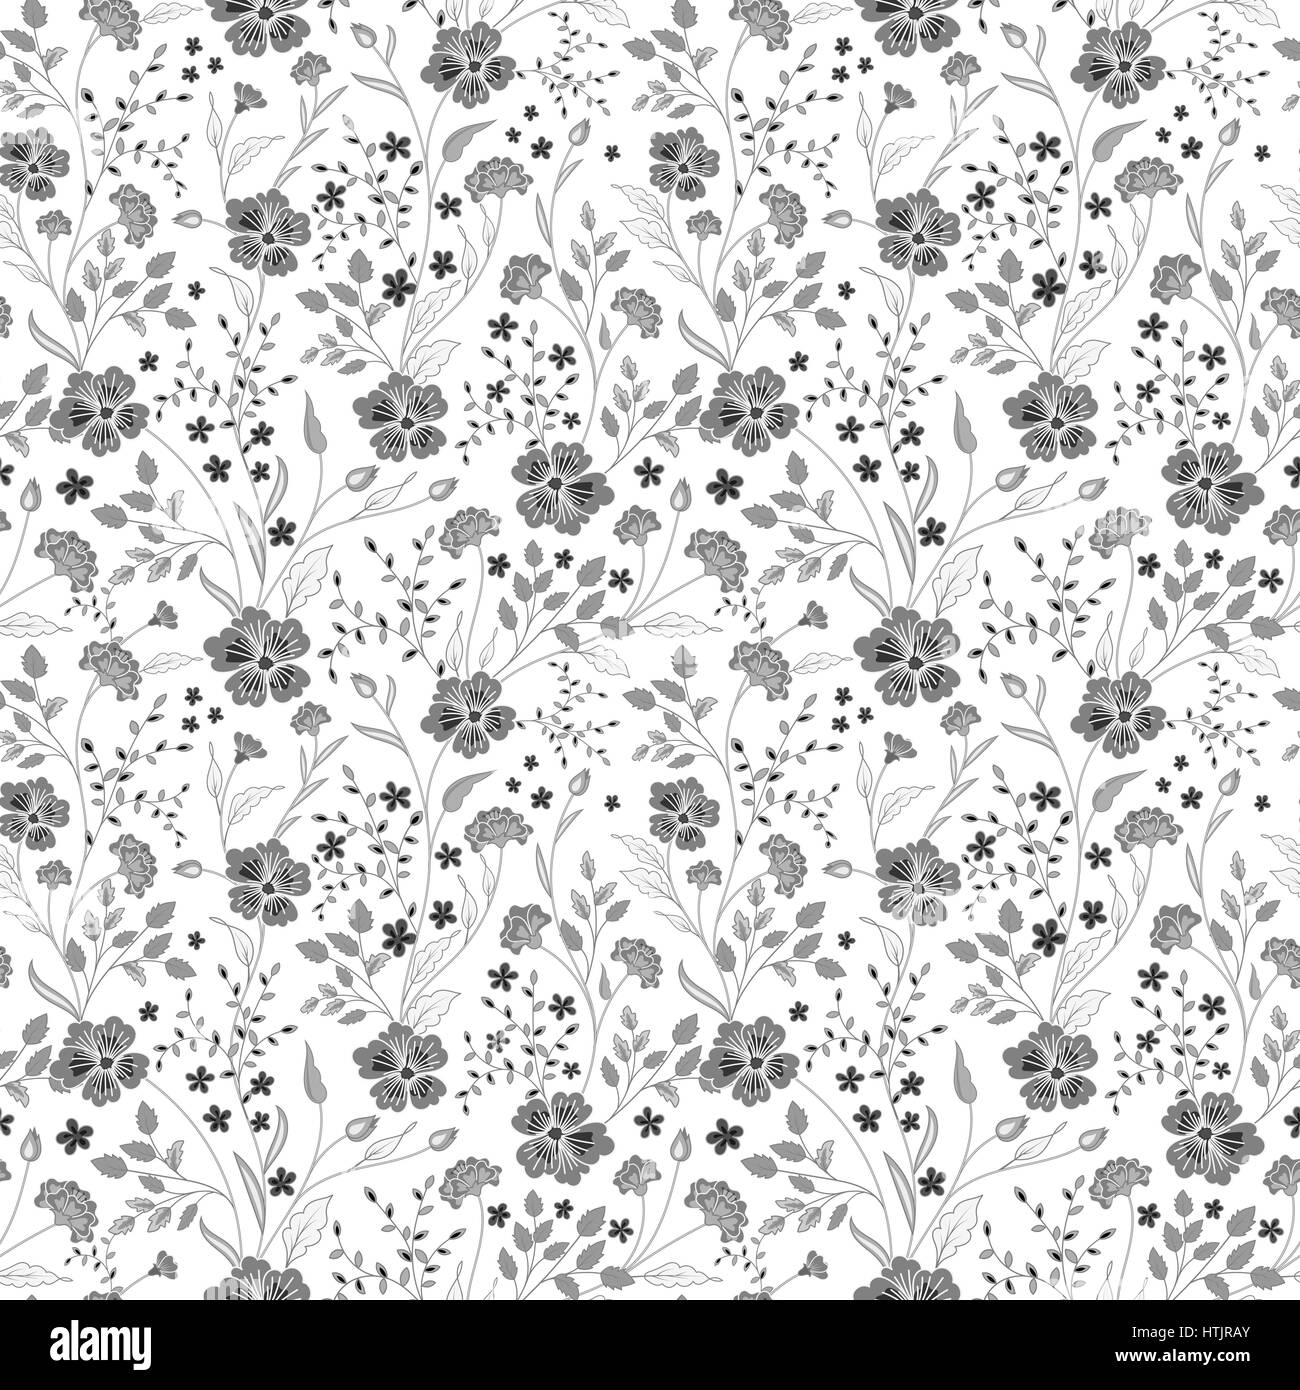 Floral Print Black And White Stock Photos Images Alamy